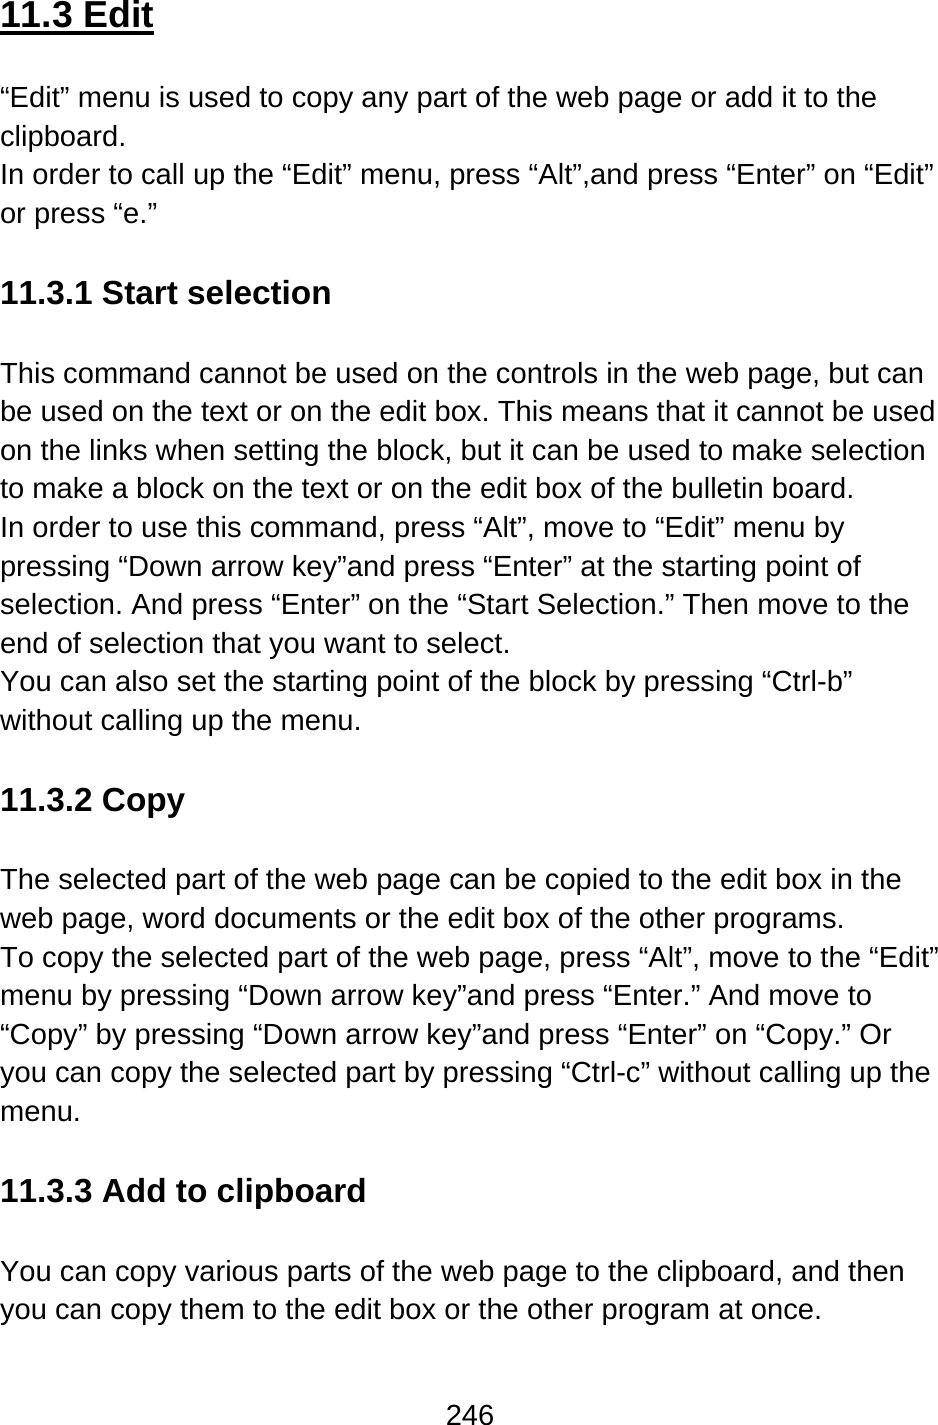 246  11.3 Edit  “Edit” menu is used to copy any part of the web page or add it to the clipboard. In order to call up the “Edit” menu, press “Alt”,and press “Enter” on “Edit” or press “e.”  11.3.1 Start selection  This command cannot be used on the controls in the web page, but can be used on the text or on the edit box. This means that it cannot be used on the links when setting the block, but it can be used to make selection to make a block on the text or on the edit box of the bulletin board. In order to use this command, press “Alt”, move to “Edit” menu by pressing “Down arrow key”and press “Enter” at the starting point of selection. And press “Enter” on the “Start Selection.” Then move to the end of selection that you want to select.   You can also set the starting point of the block by pressing “Ctrl-b” without calling up the menu.  11.3.2 Copy  The selected part of the web page can be copied to the edit box in the web page, word documents or the edit box of the other programs.   To copy the selected part of the web page, press “Alt”, move to the “Edit” menu by pressing “Down arrow key”and press “Enter.” And move to “Copy” by pressing “Down arrow key”and press “Enter” on “Copy.” Or you can copy the selected part by pressing “Ctrl-c” without calling up the menu.  11.3.3 Add to clipboard  You can copy various parts of the web page to the clipboard, and then you can copy them to the edit box or the other program at once. 